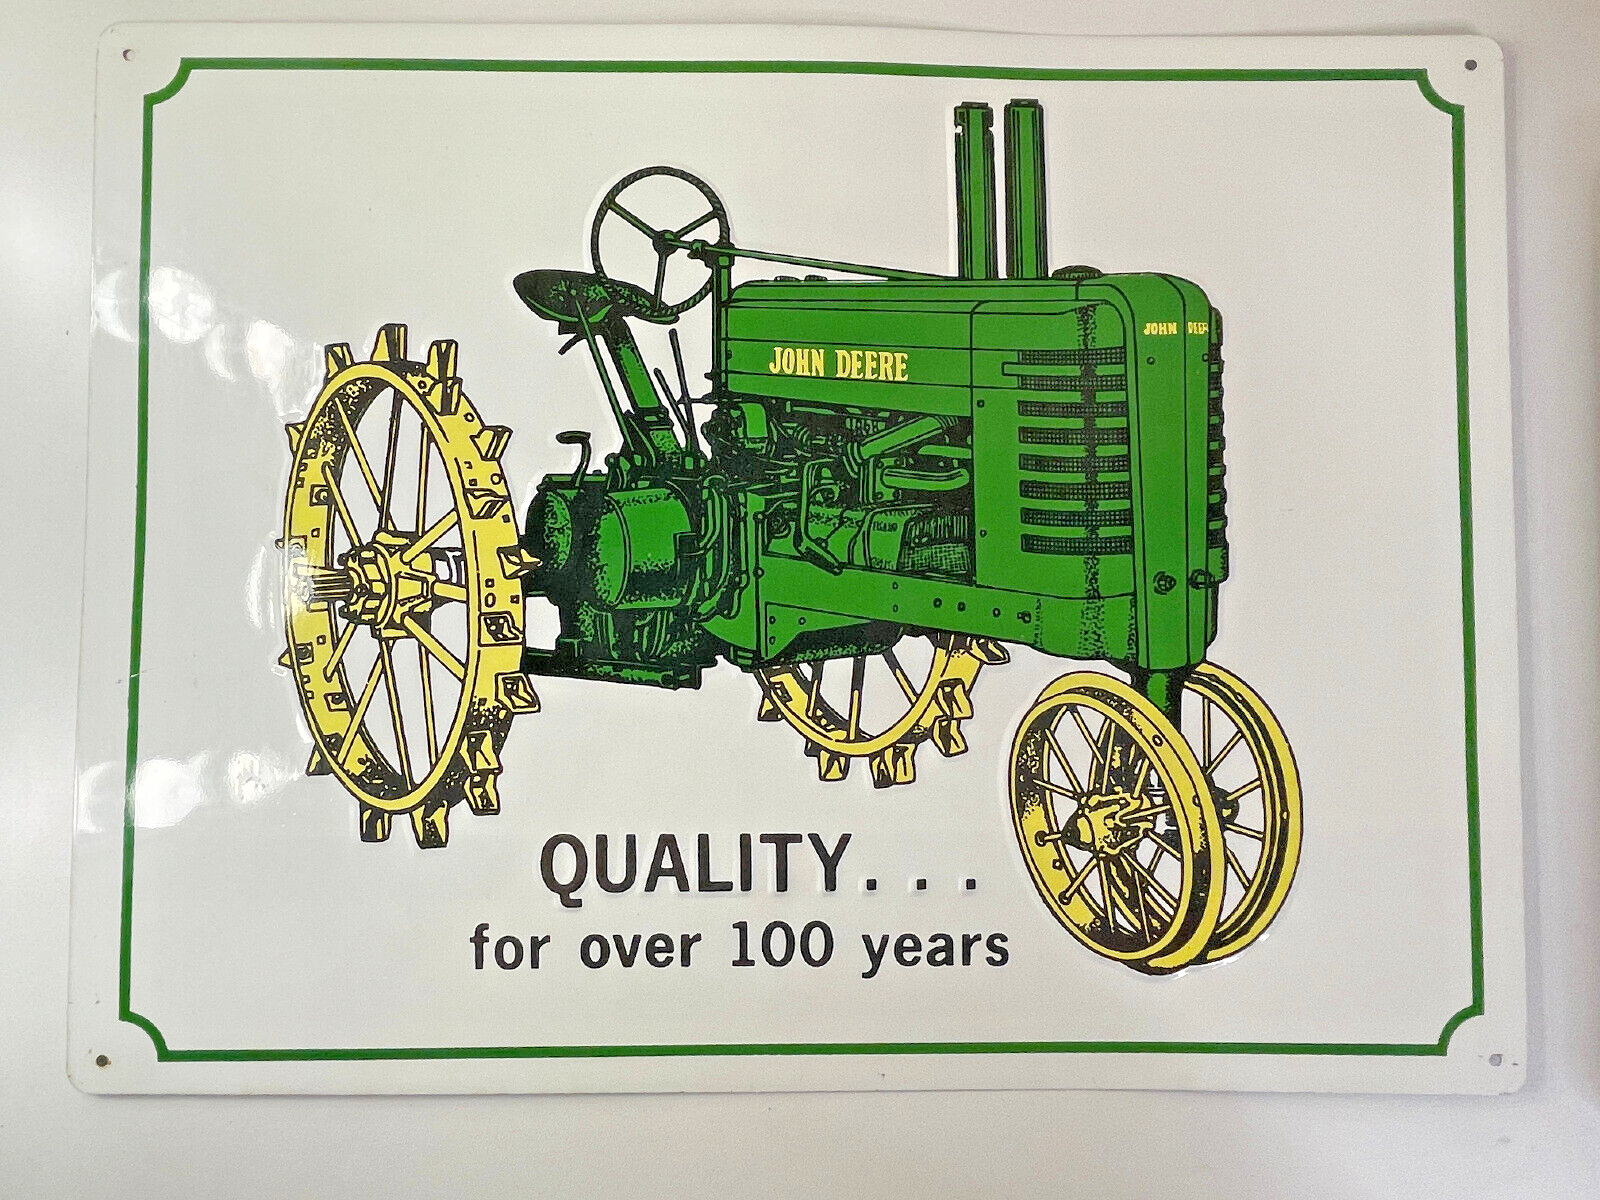 Primary image for John Deere QUALITY. . . for over 100 years Metal Sign 